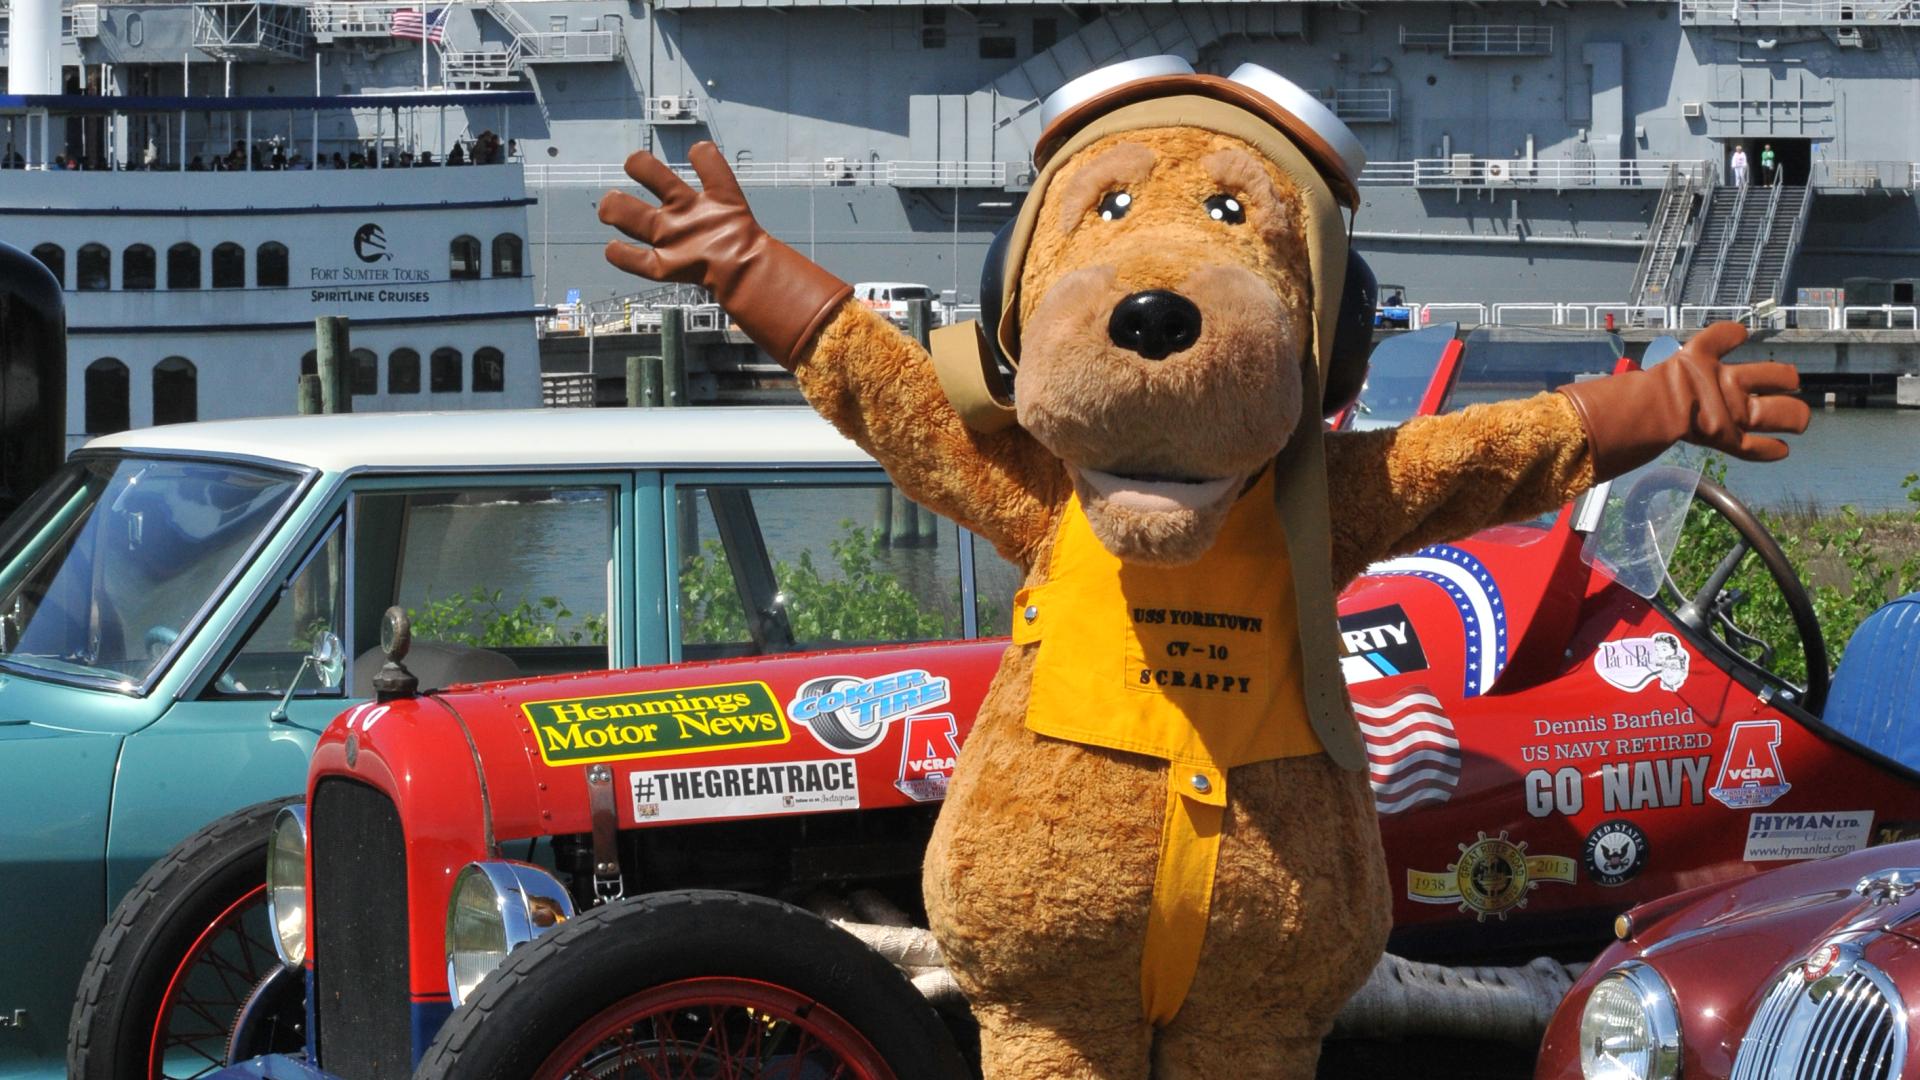 Scrappy, the Patriots Point Naval & Maritime Museum mascot, standing around antique automobiles